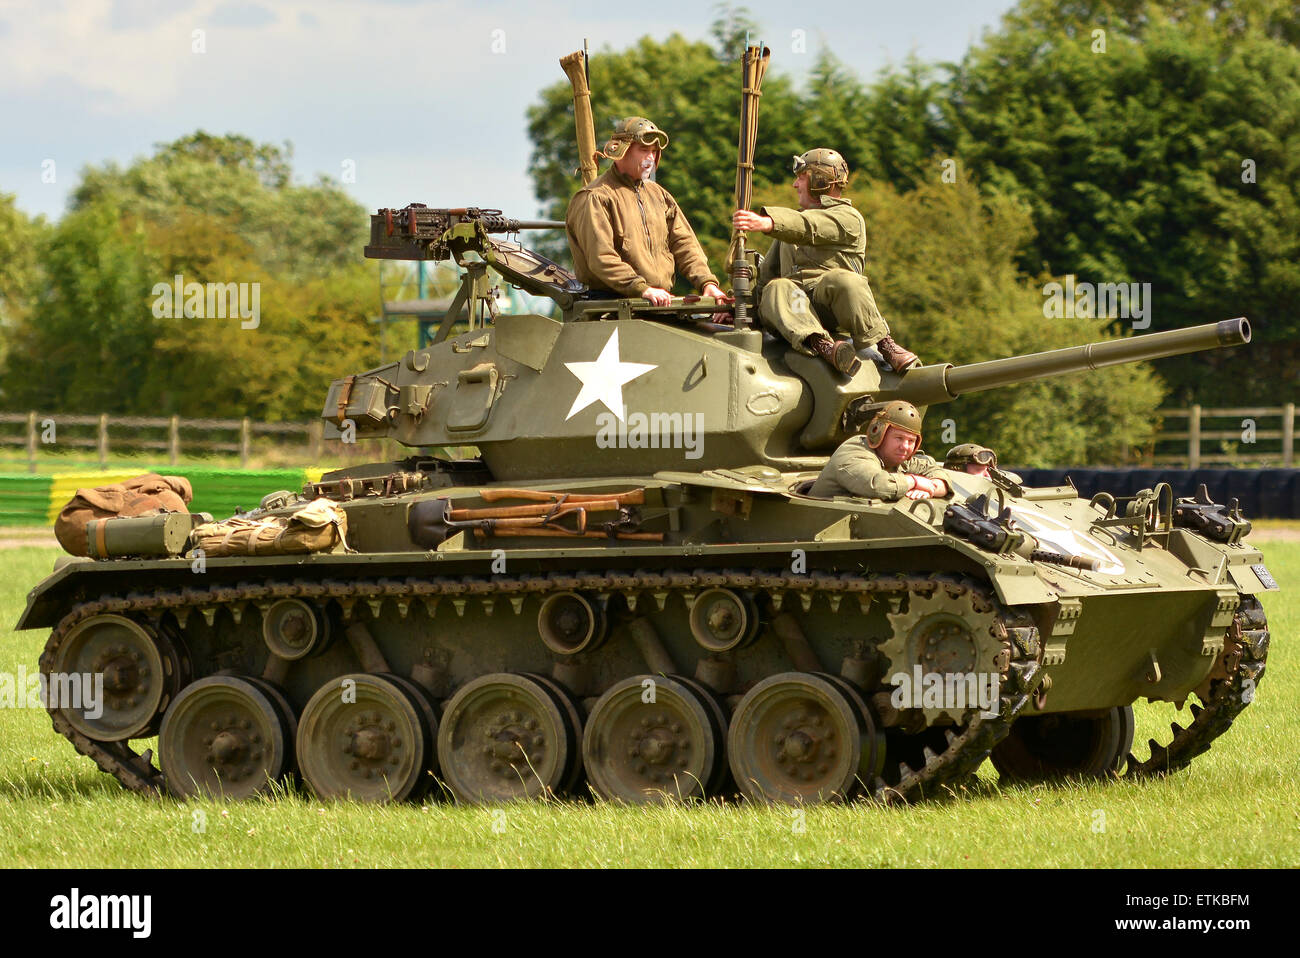 World War Two American Chaffee Tank and crew, World War Two tank display at the Croft Nostalgia Festival in Darlington Sat 5 - Sun 6 August 2016 Stock Photo